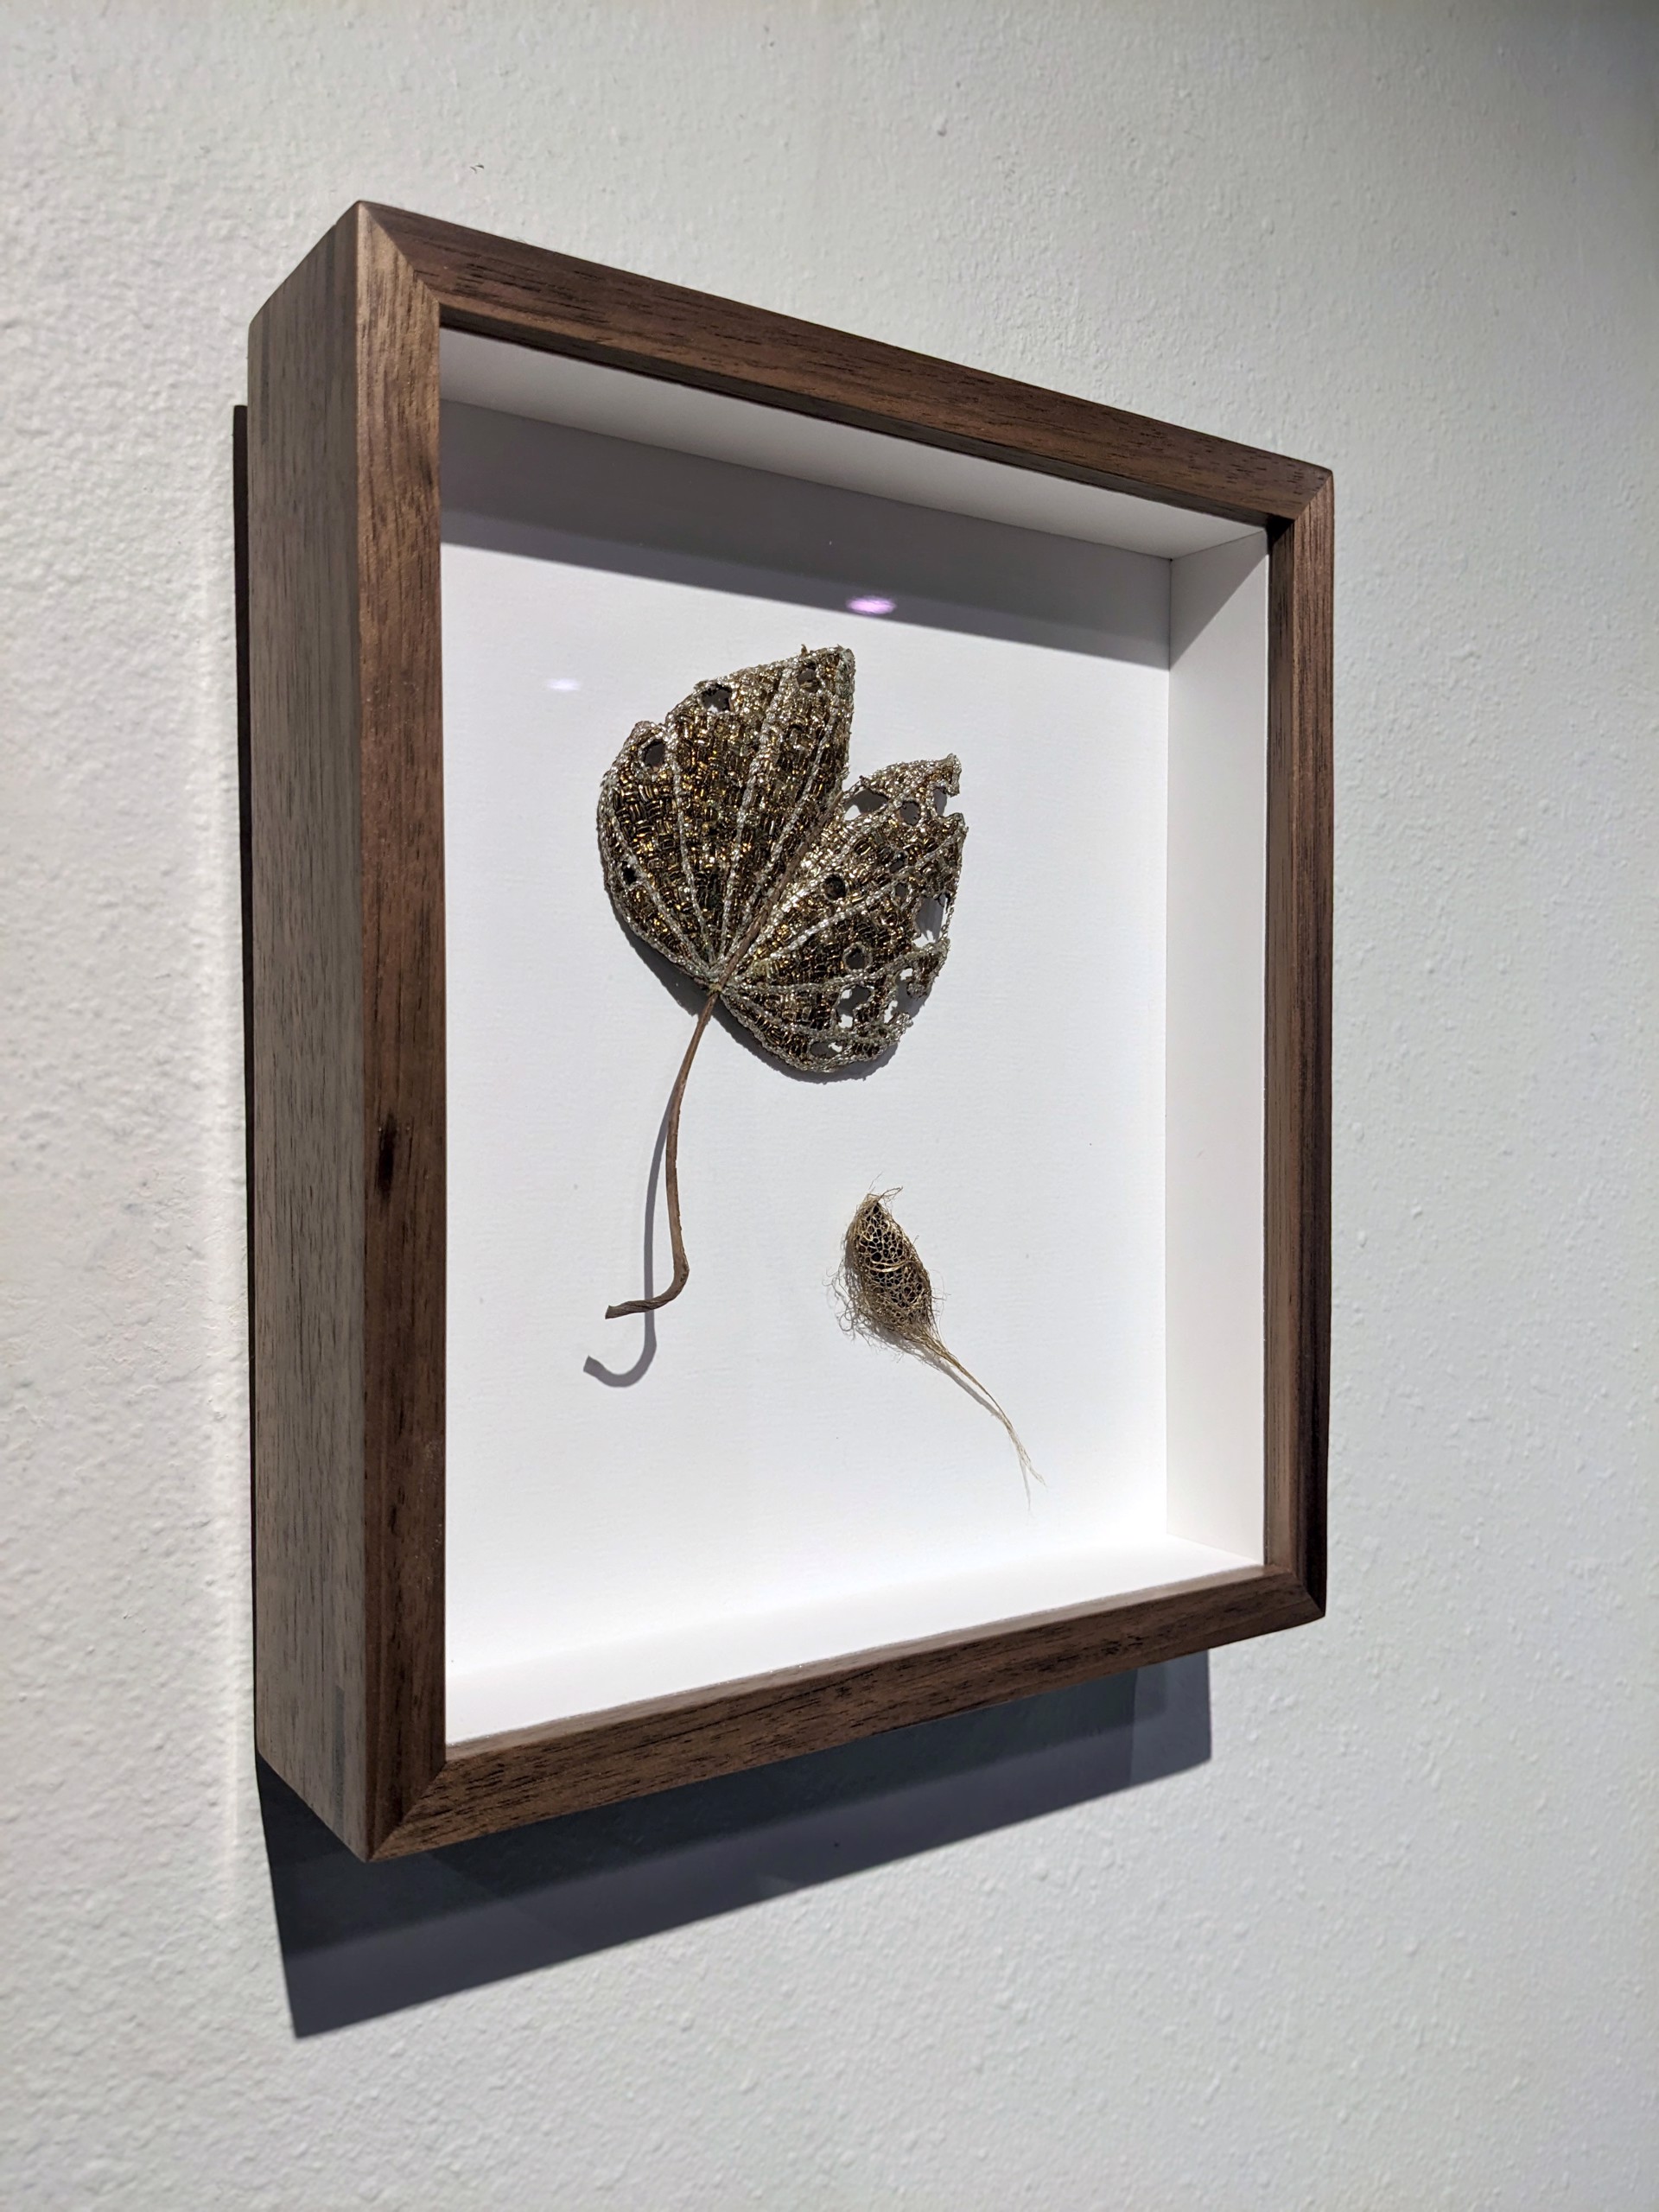 The Impermanence of Life: Bauhinia Leaf II by Tiao Nithakhong Somsanith